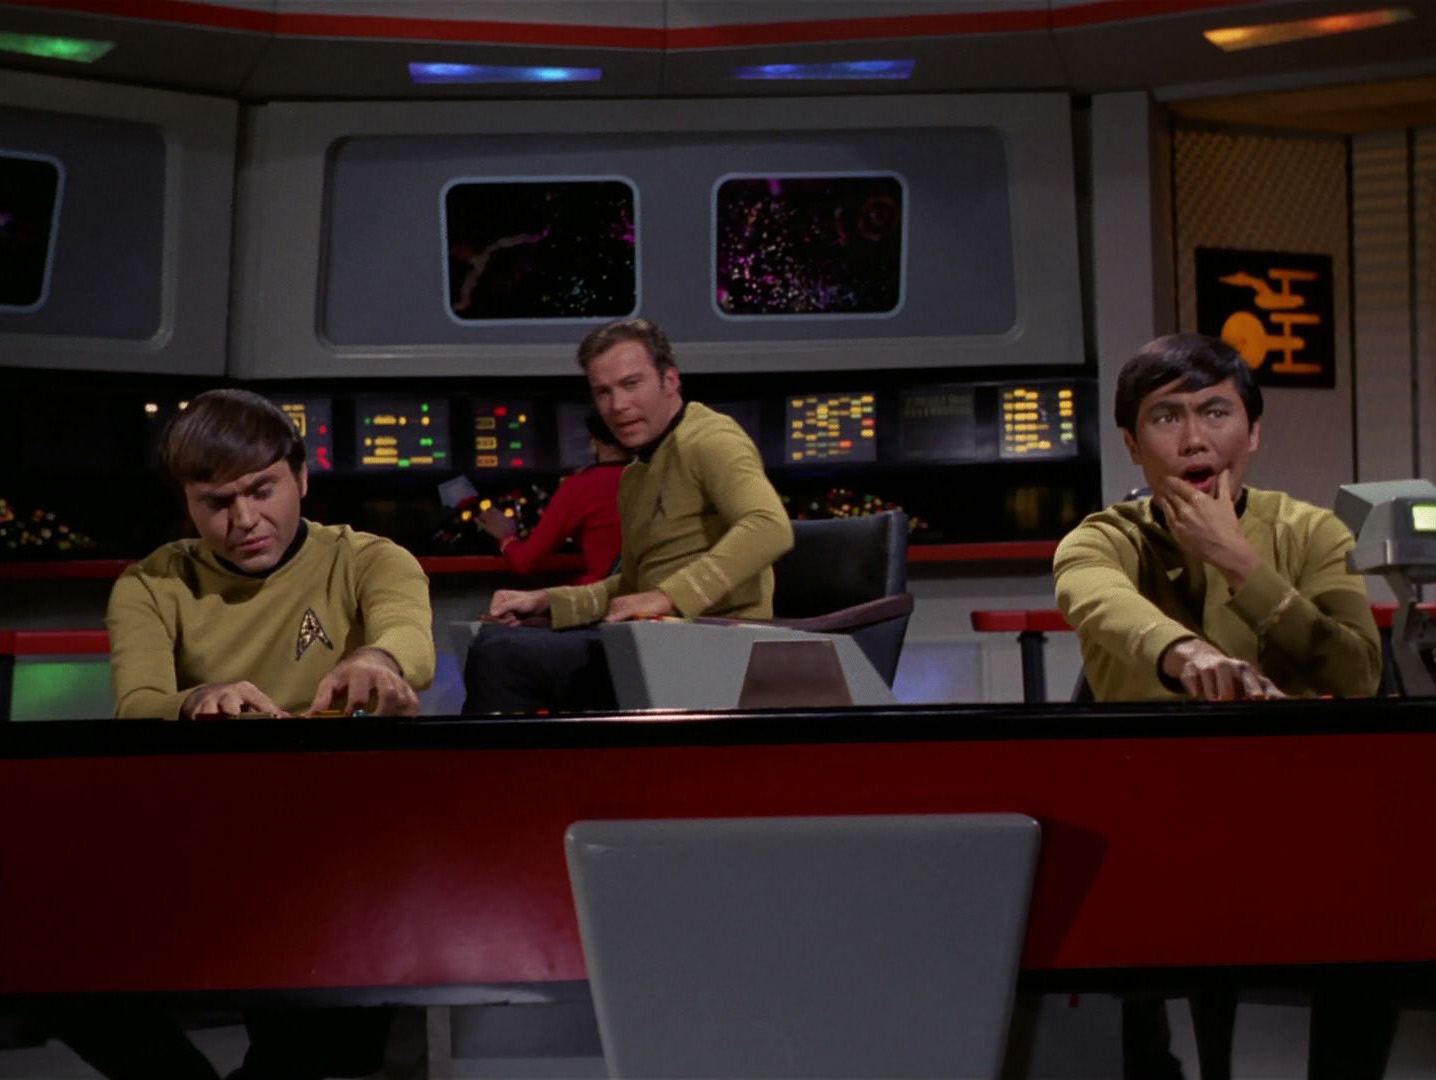 Sulu thinking "What the hell was THAT?"